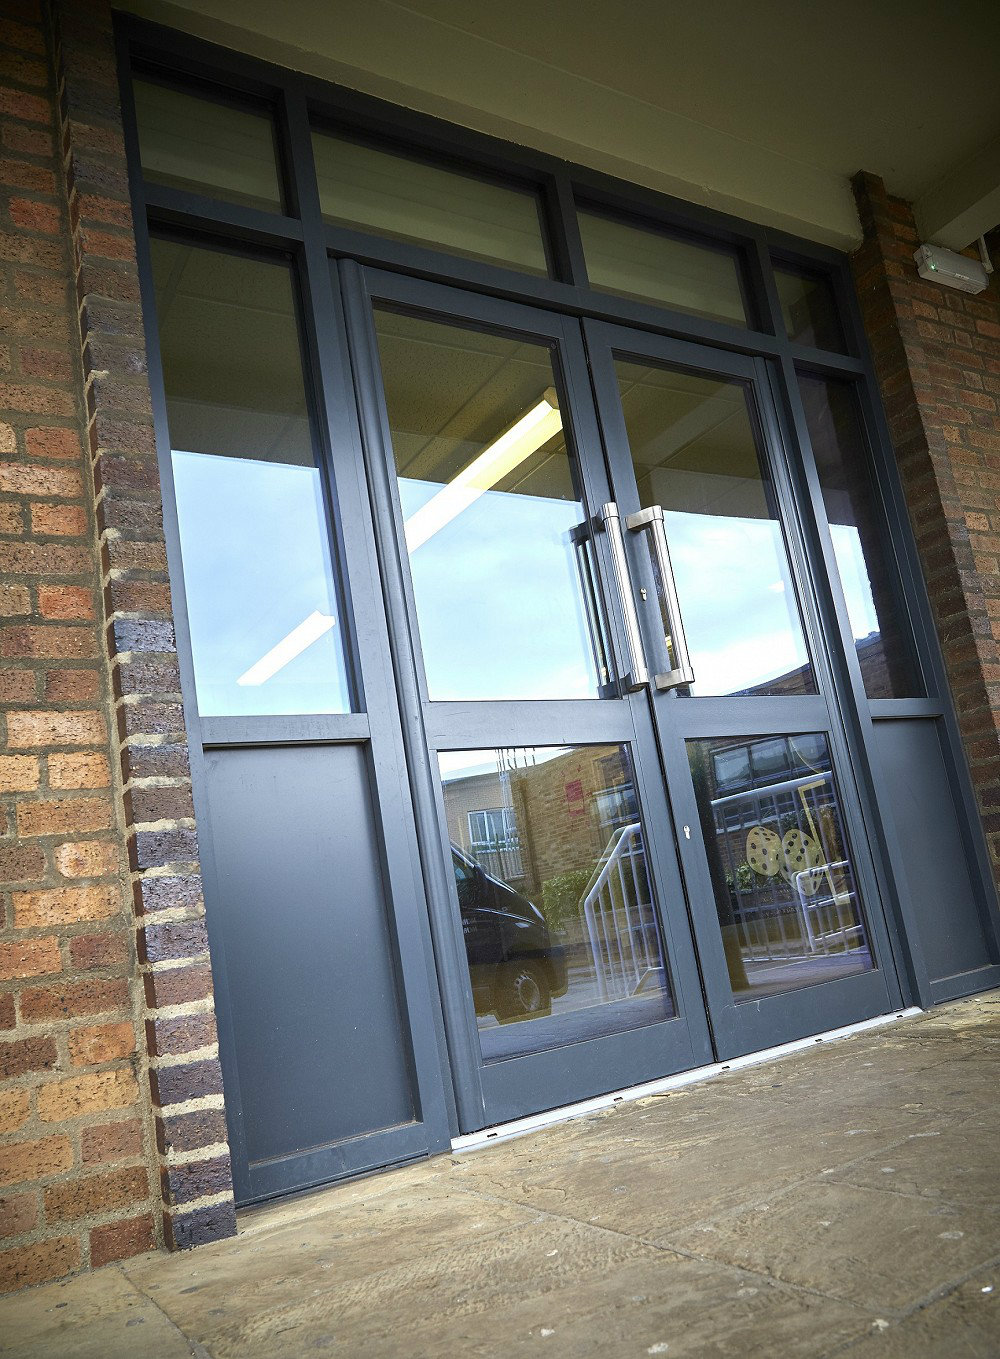 The entrance to a refurbished school which is glazed with grey aluminium doors